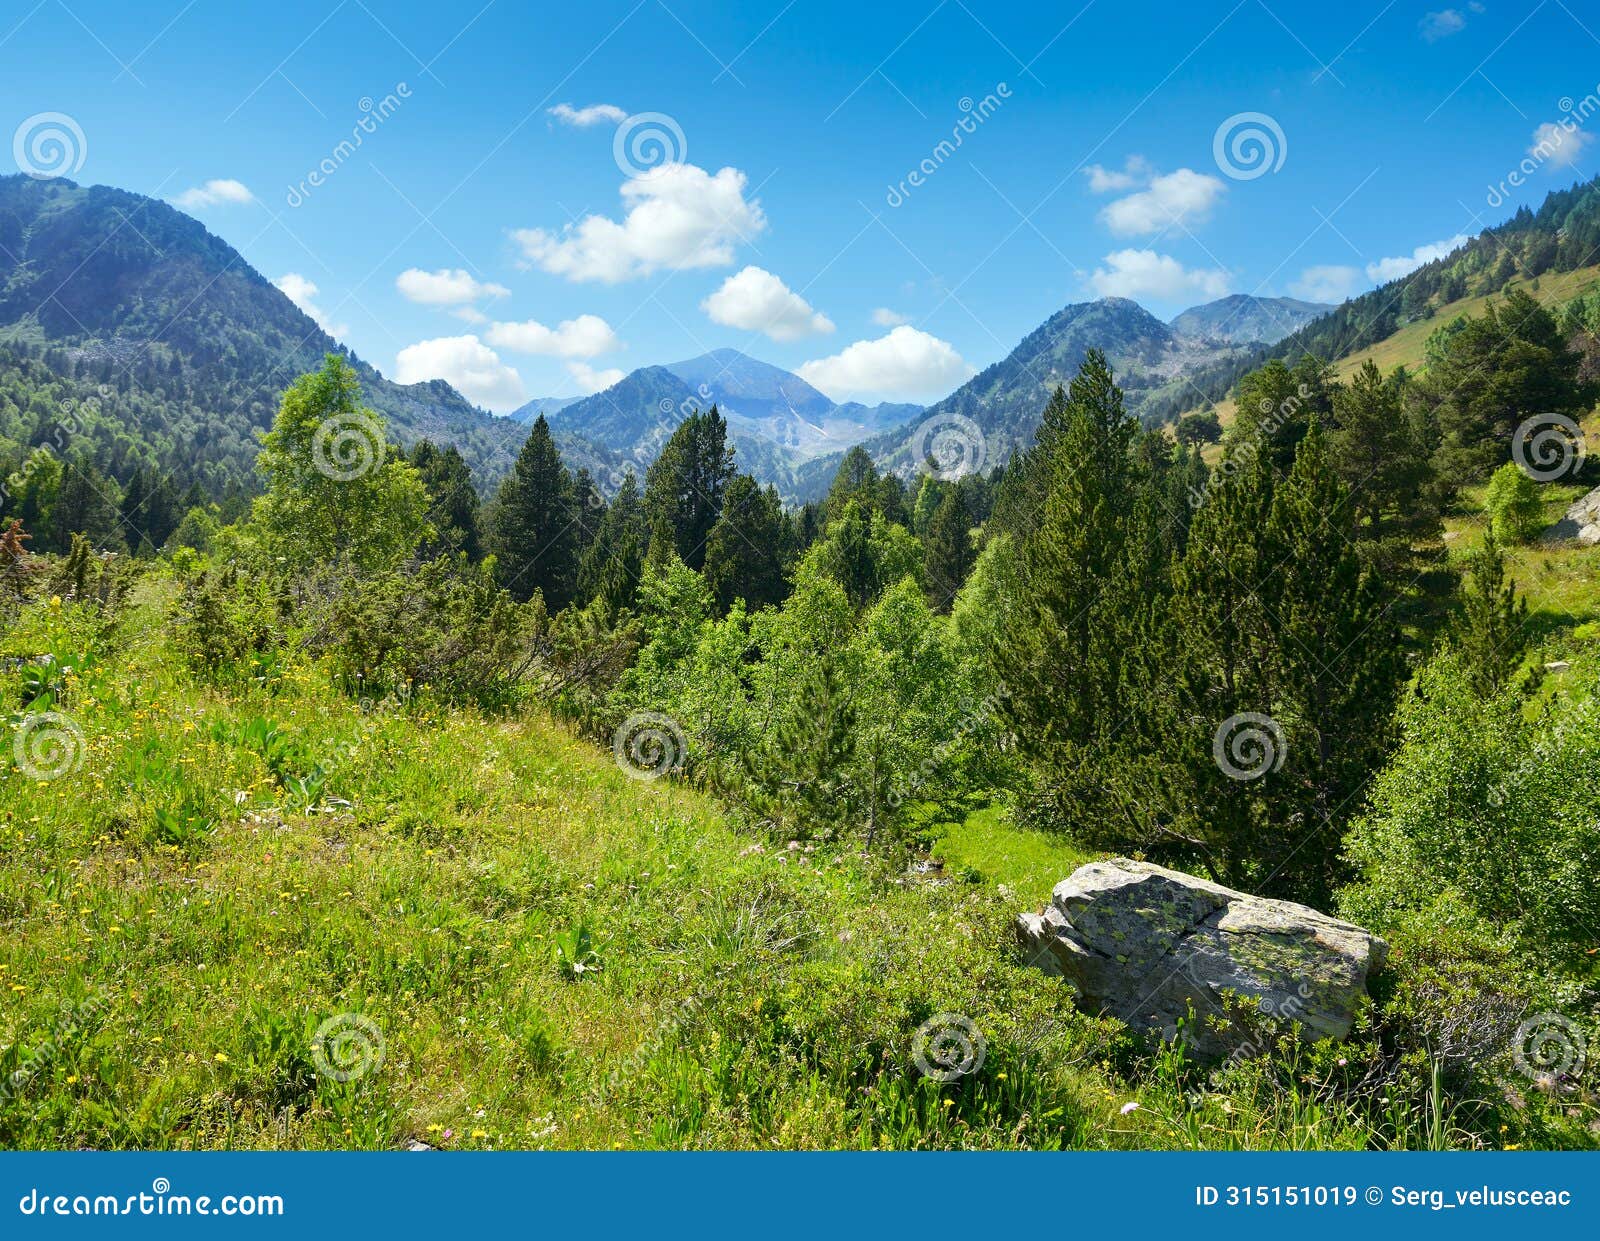 mountain landscape with green grass and flowers. andorra